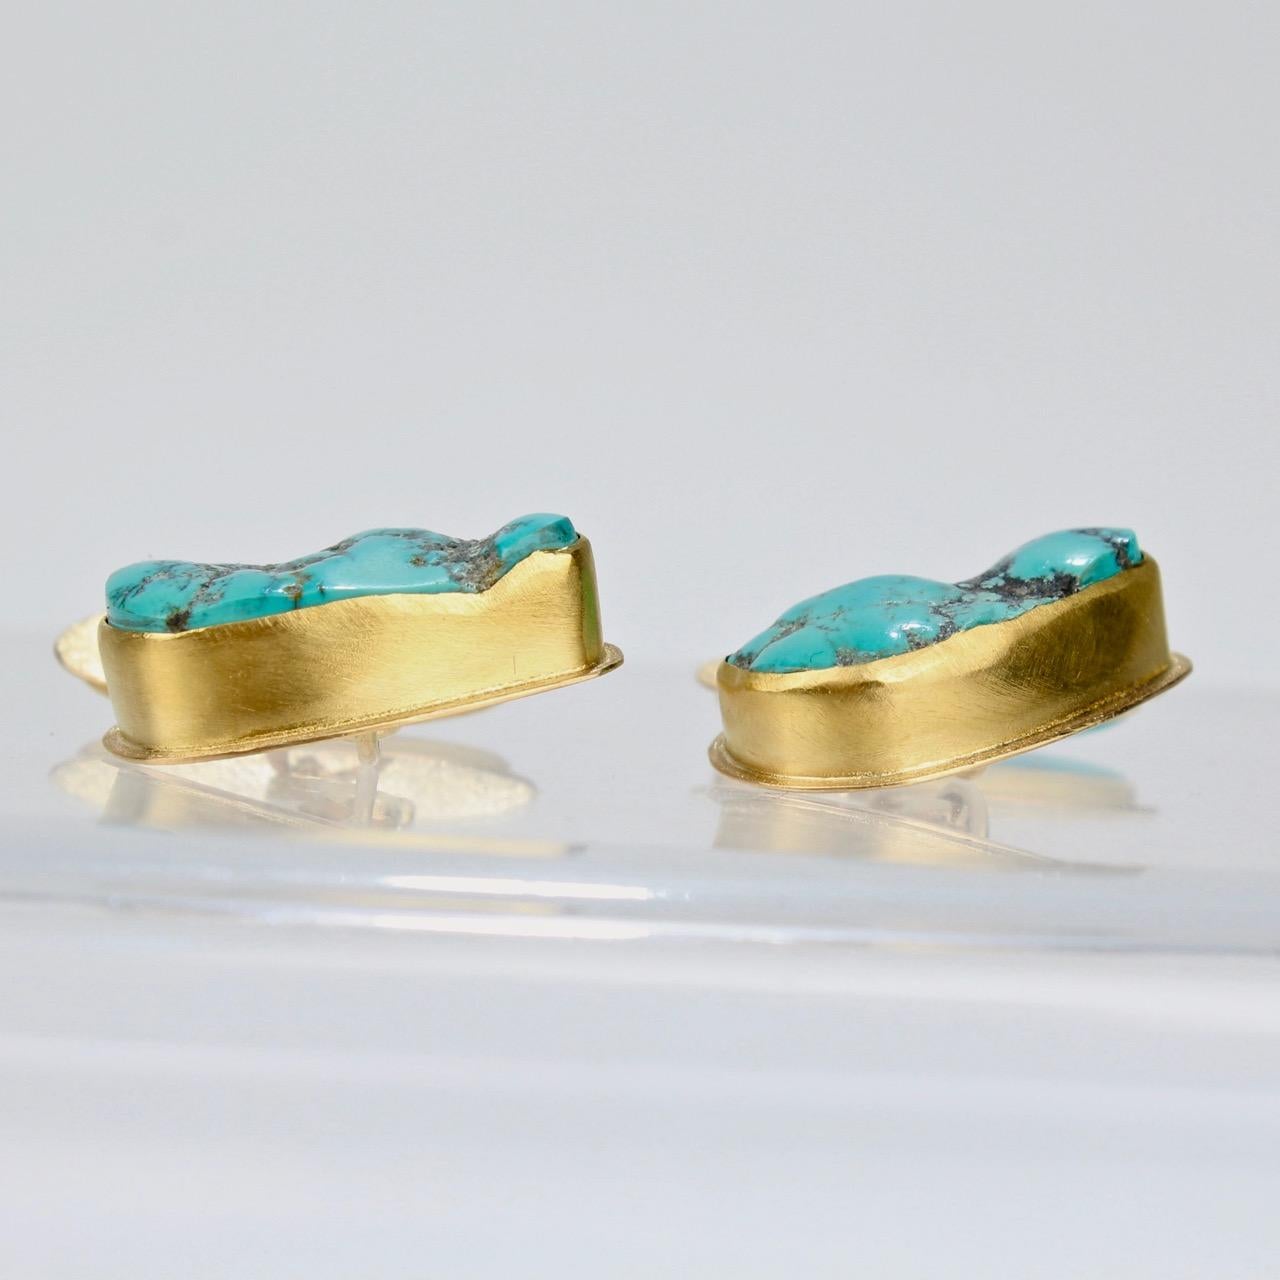 Modern Isabelle Posillico Turquoise and Yellow Gold Cufflinks